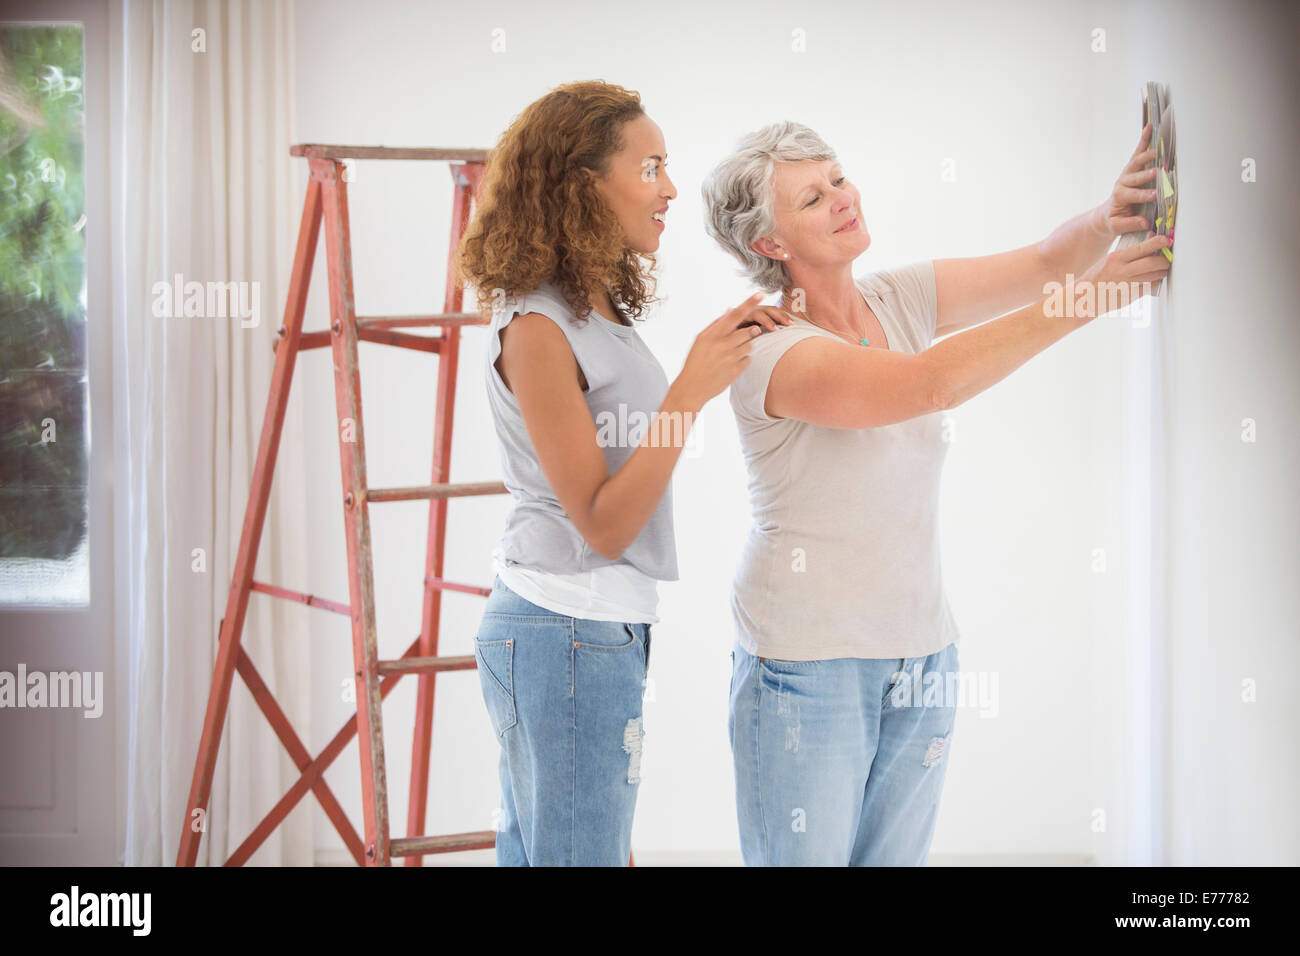 Two women deciding on wall color together Stock Photo